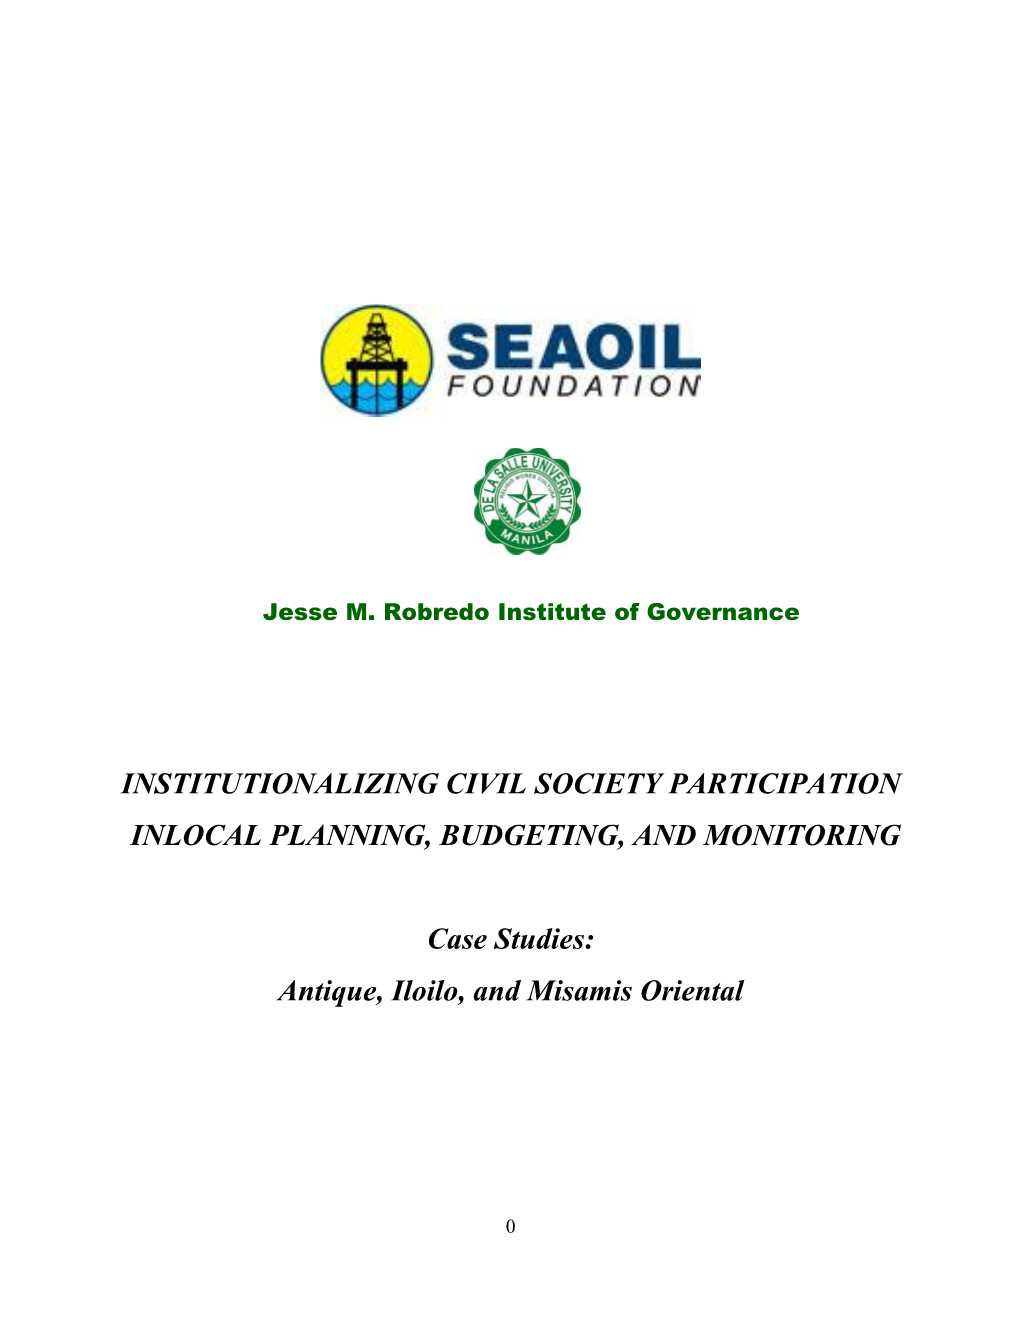 INSTITUTIONALIZING CIVIL SOCIETY PARTICIPATION INLOCAL PLANNING, BUDGETING, and MONITORING Case Studies: Antique, Iloilo